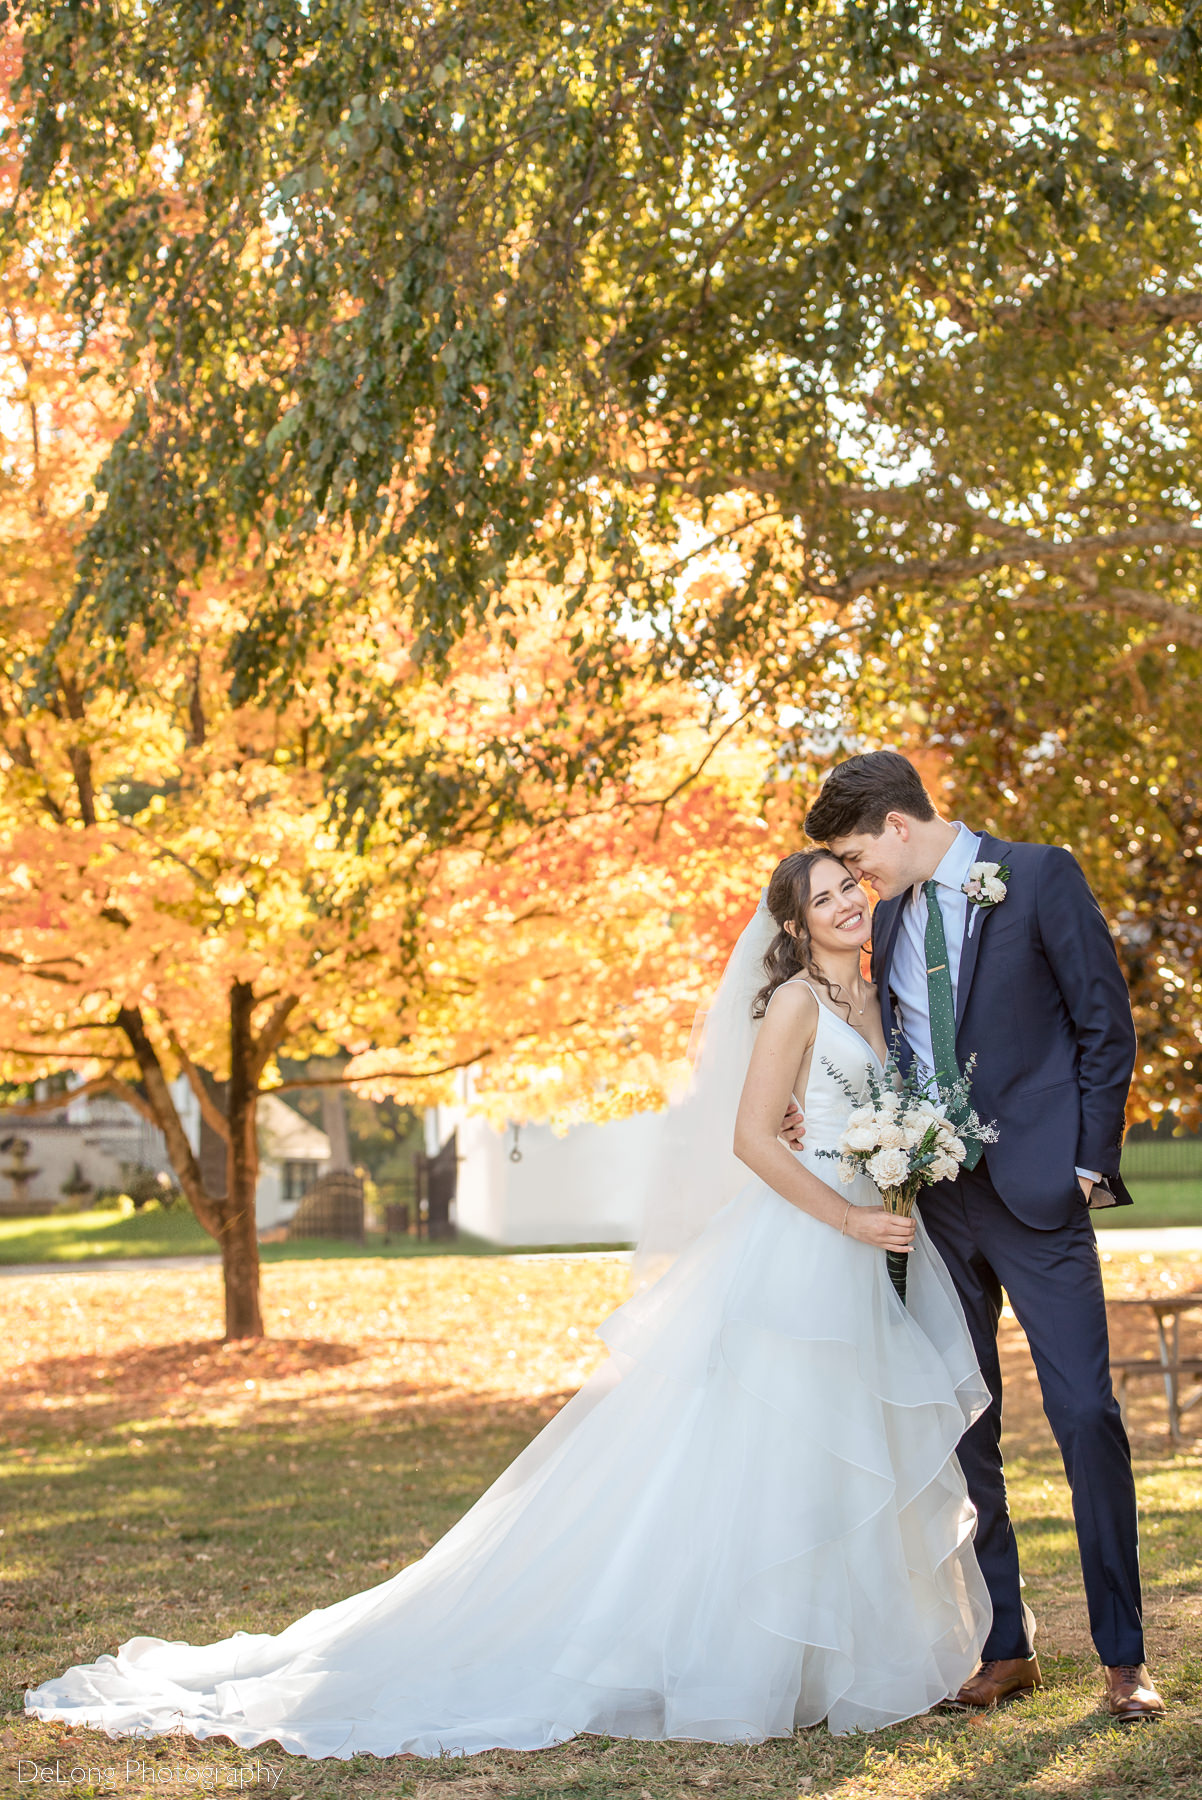 Groom nuzzling into the bride's temple as she smiles at the camera in front of yellow and orange autumn colored trees in Freedom Park by Charlotte wedding photographers DeLong Photography